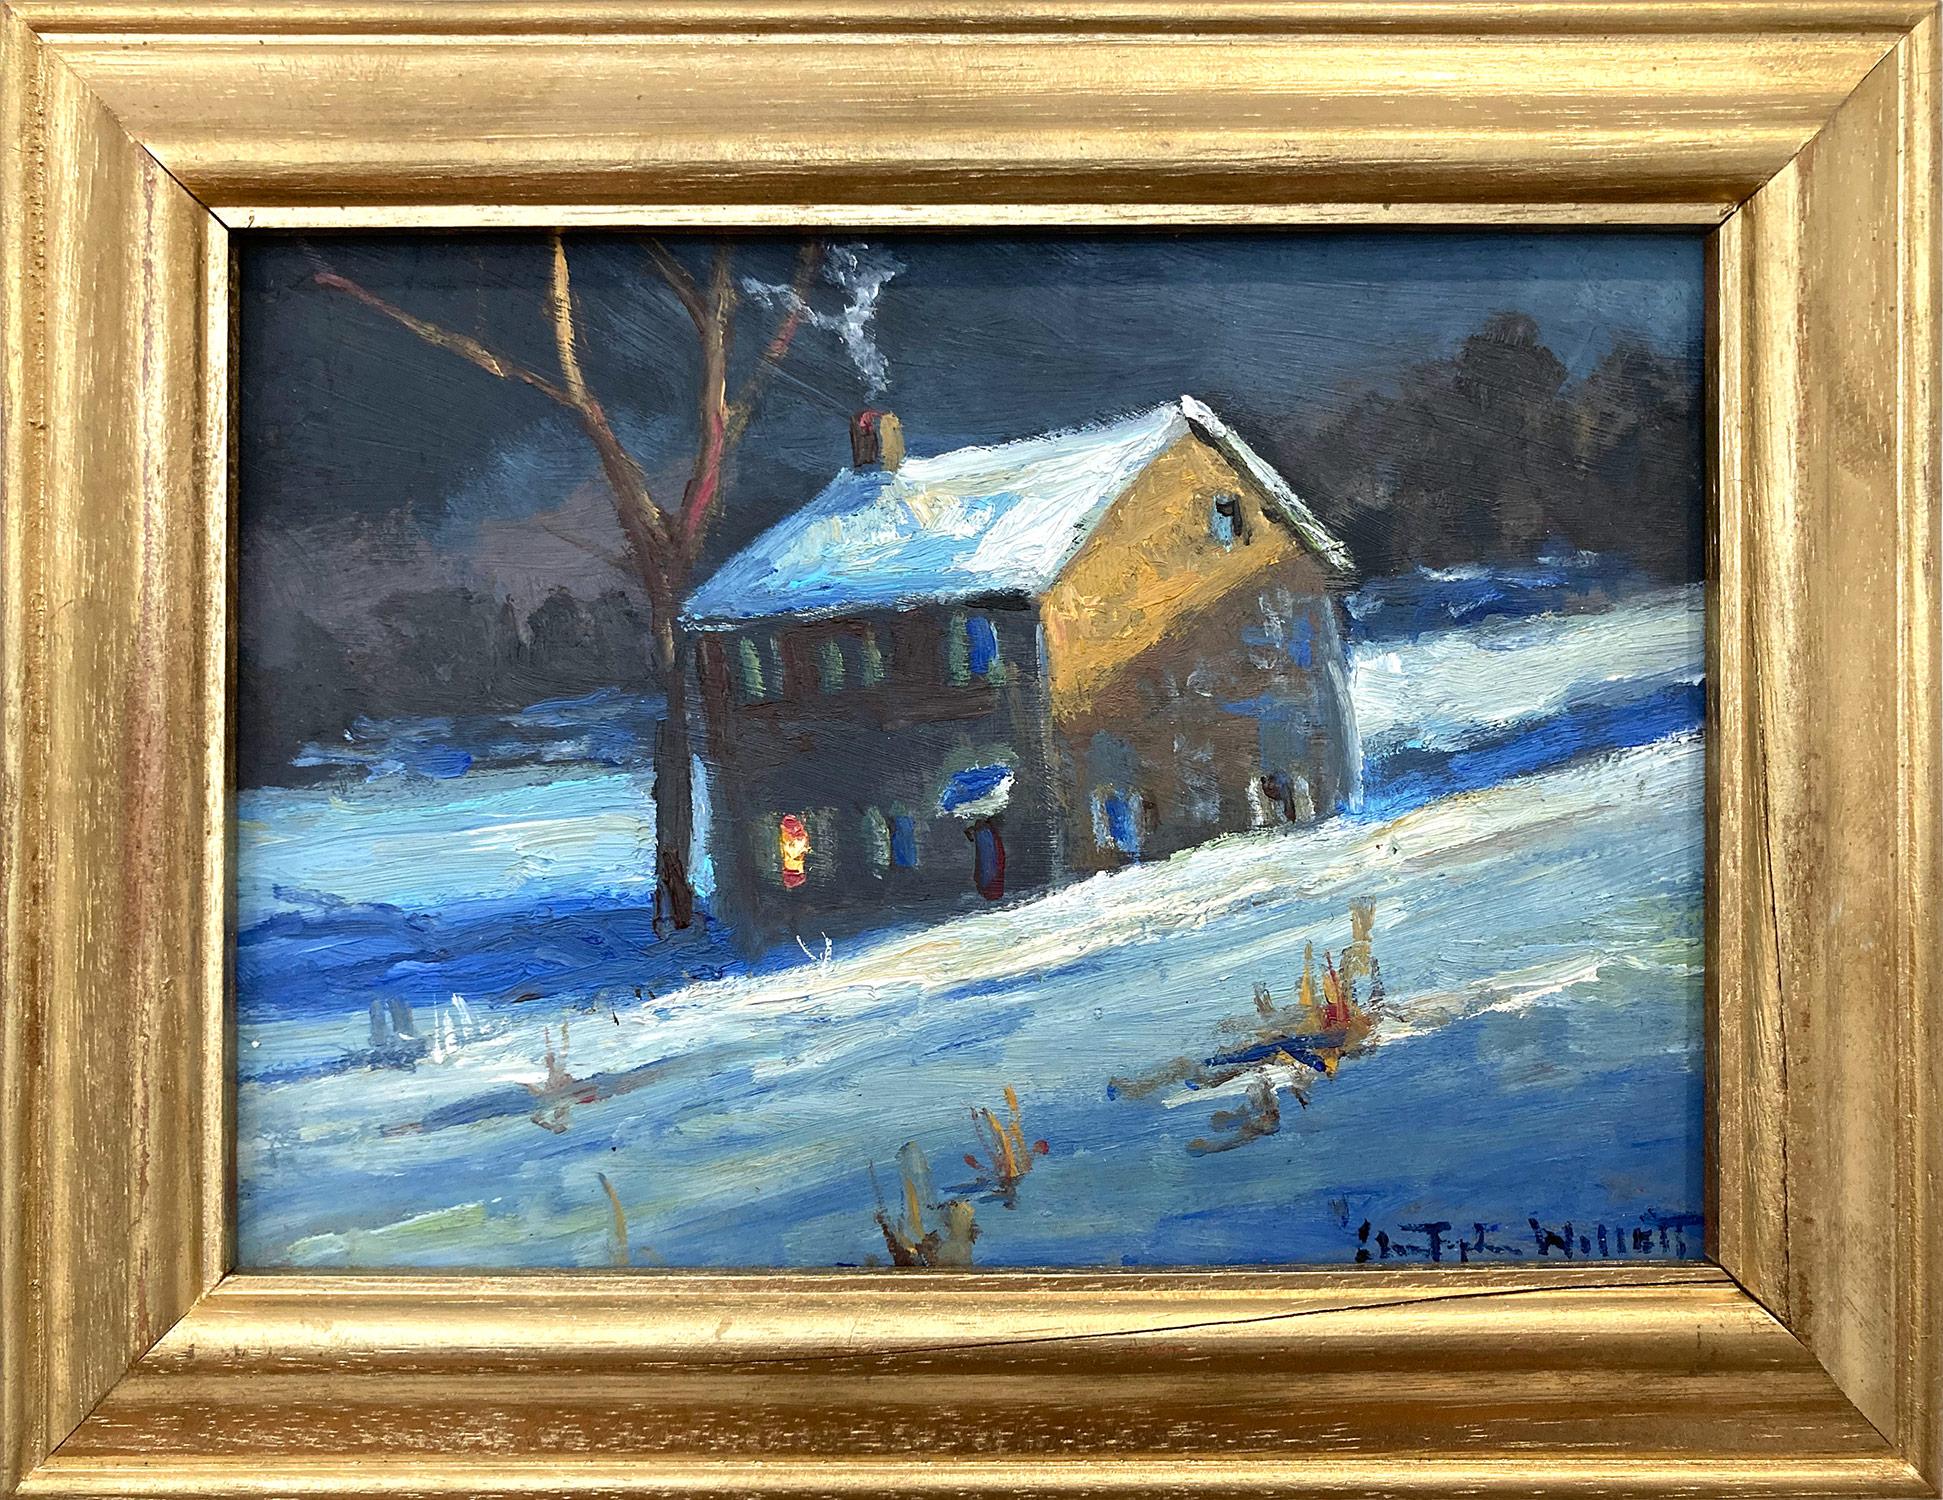 Christopher Willett Figurative Painting - "In For the Night" PA Bucks County Twilight Snow Scene Landscape Oil Painting 